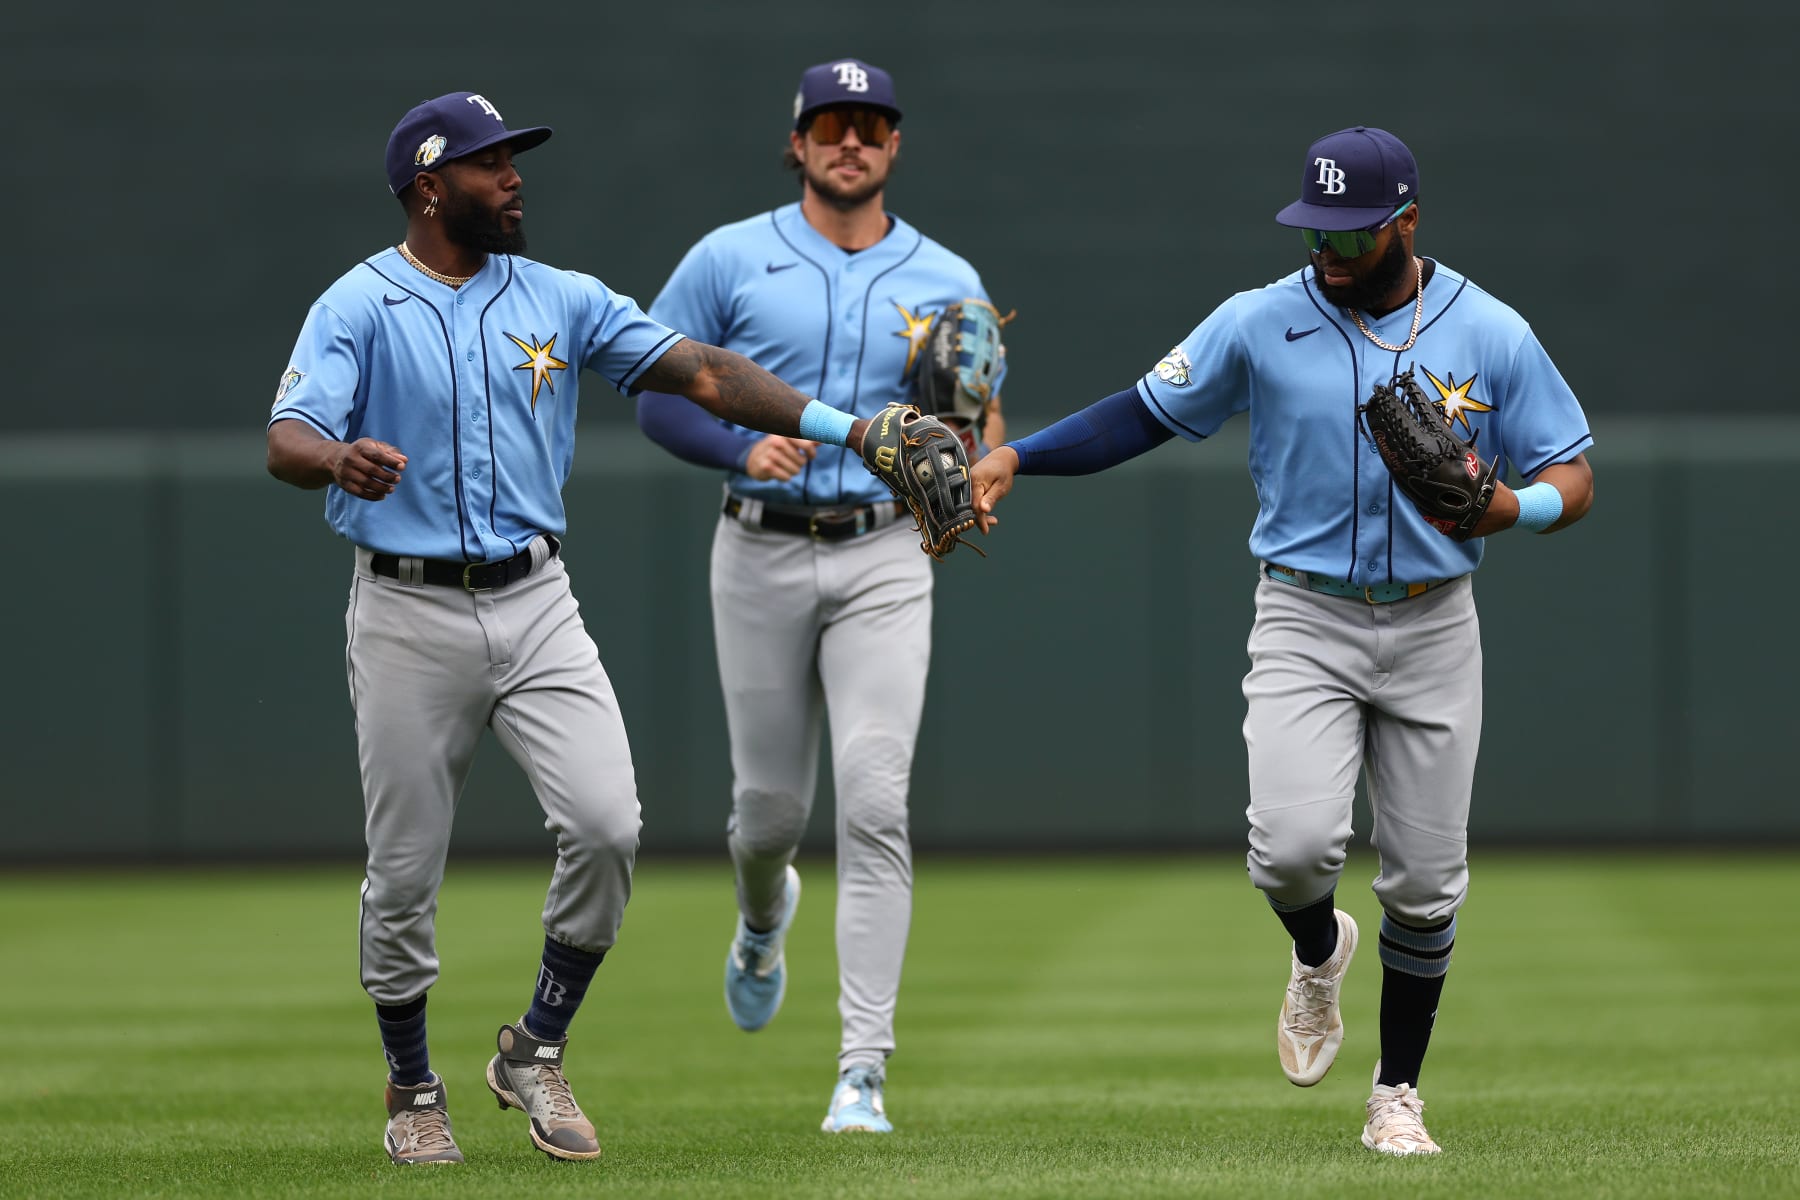 Rays heading to playoffs for 5th straight year despite 5-4 loss to